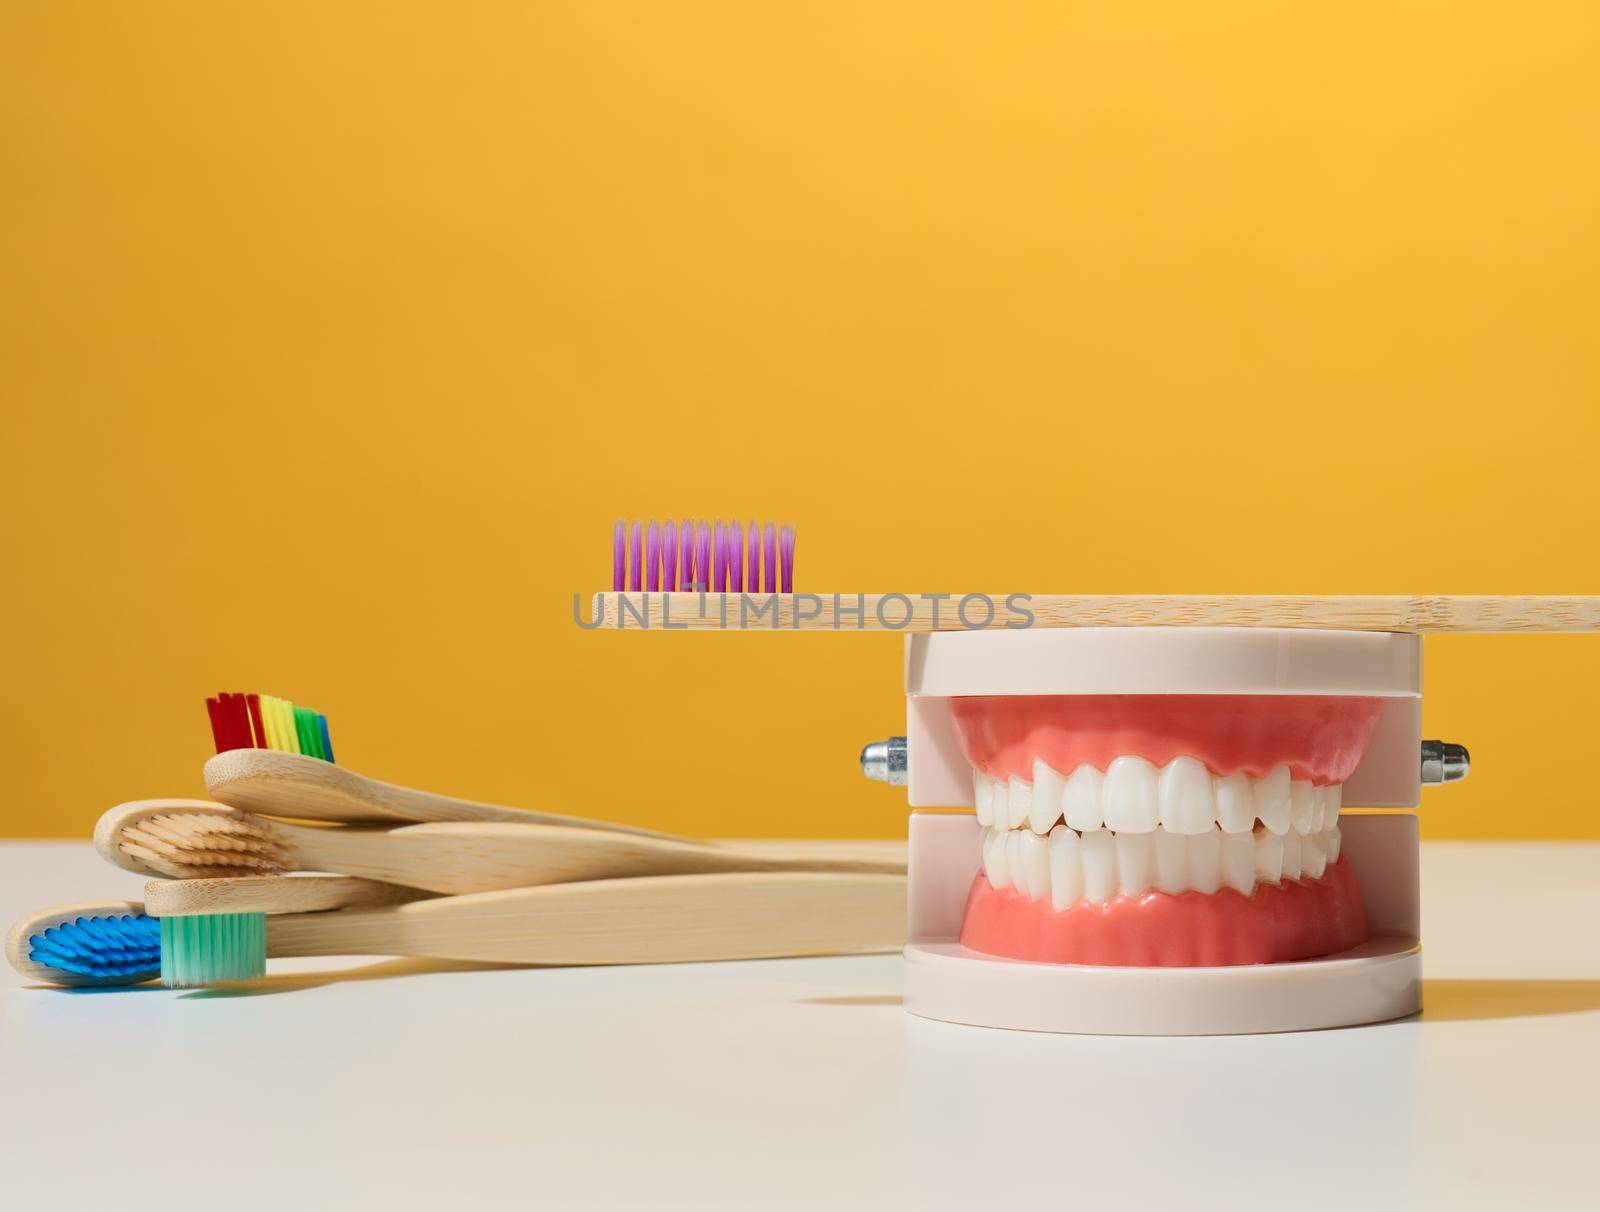 plastic model of a human jaw with white teeth and wooden toothbrush on a yellow background, oral hygiene by ndanko